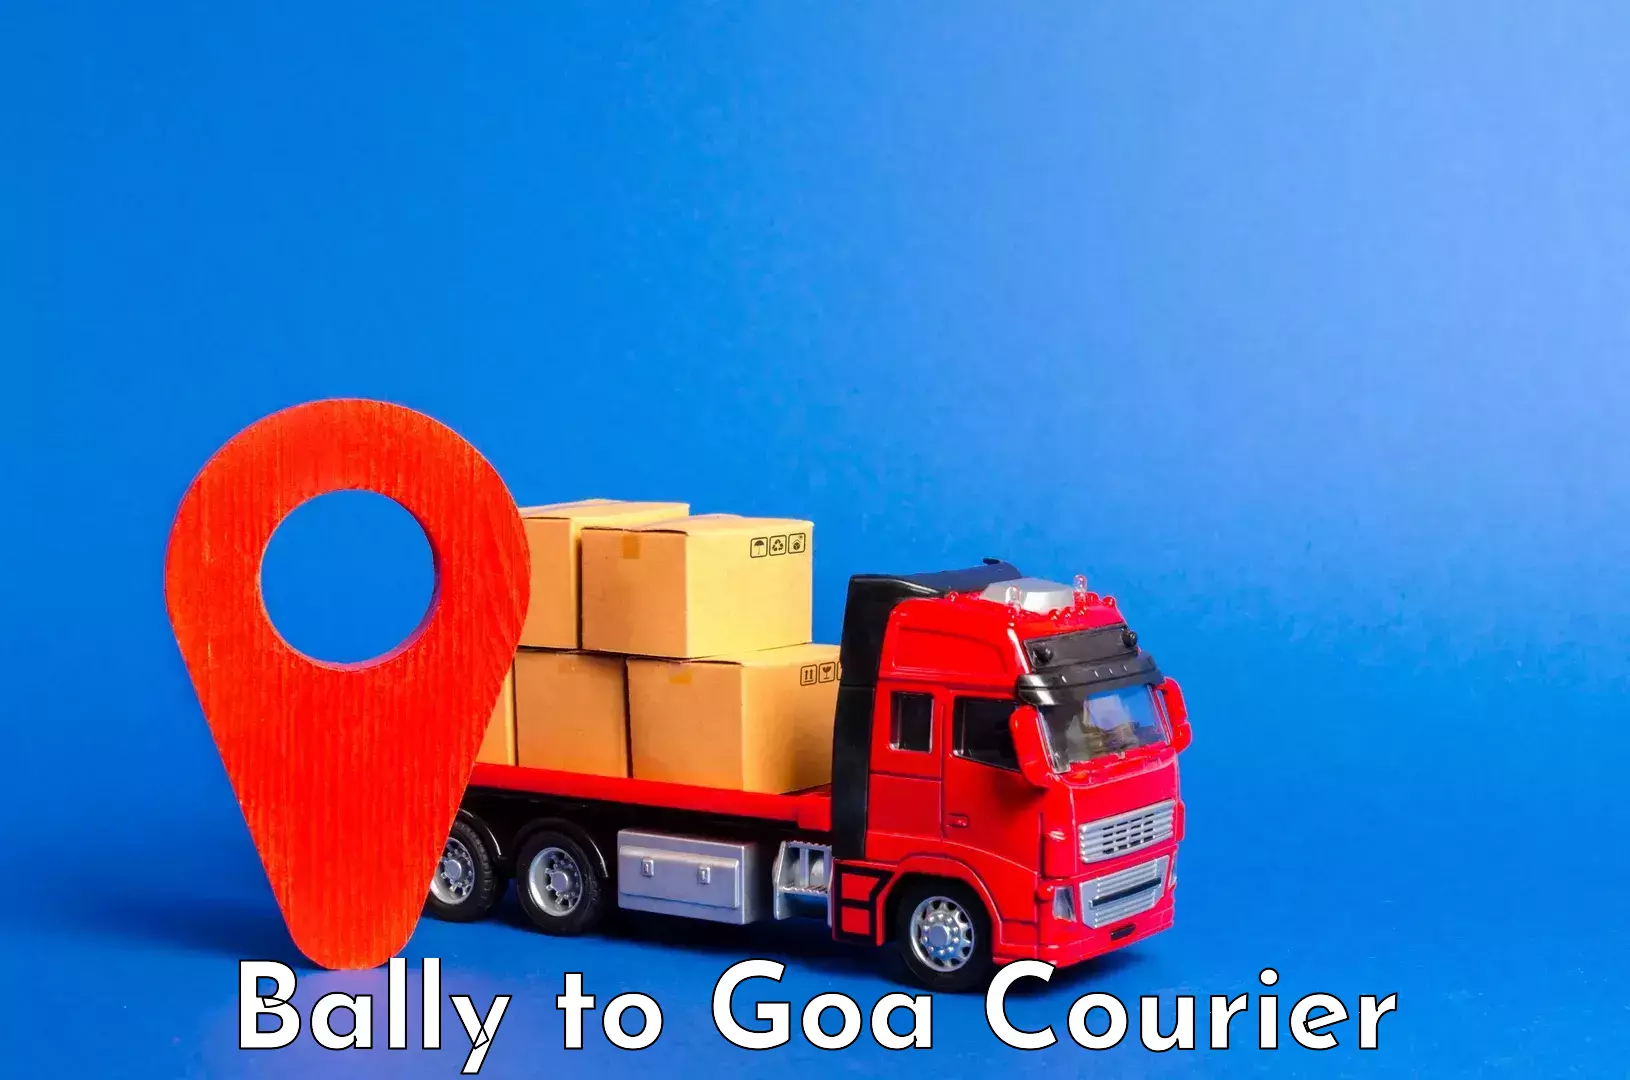 Luggage delivery app Bally to Goa